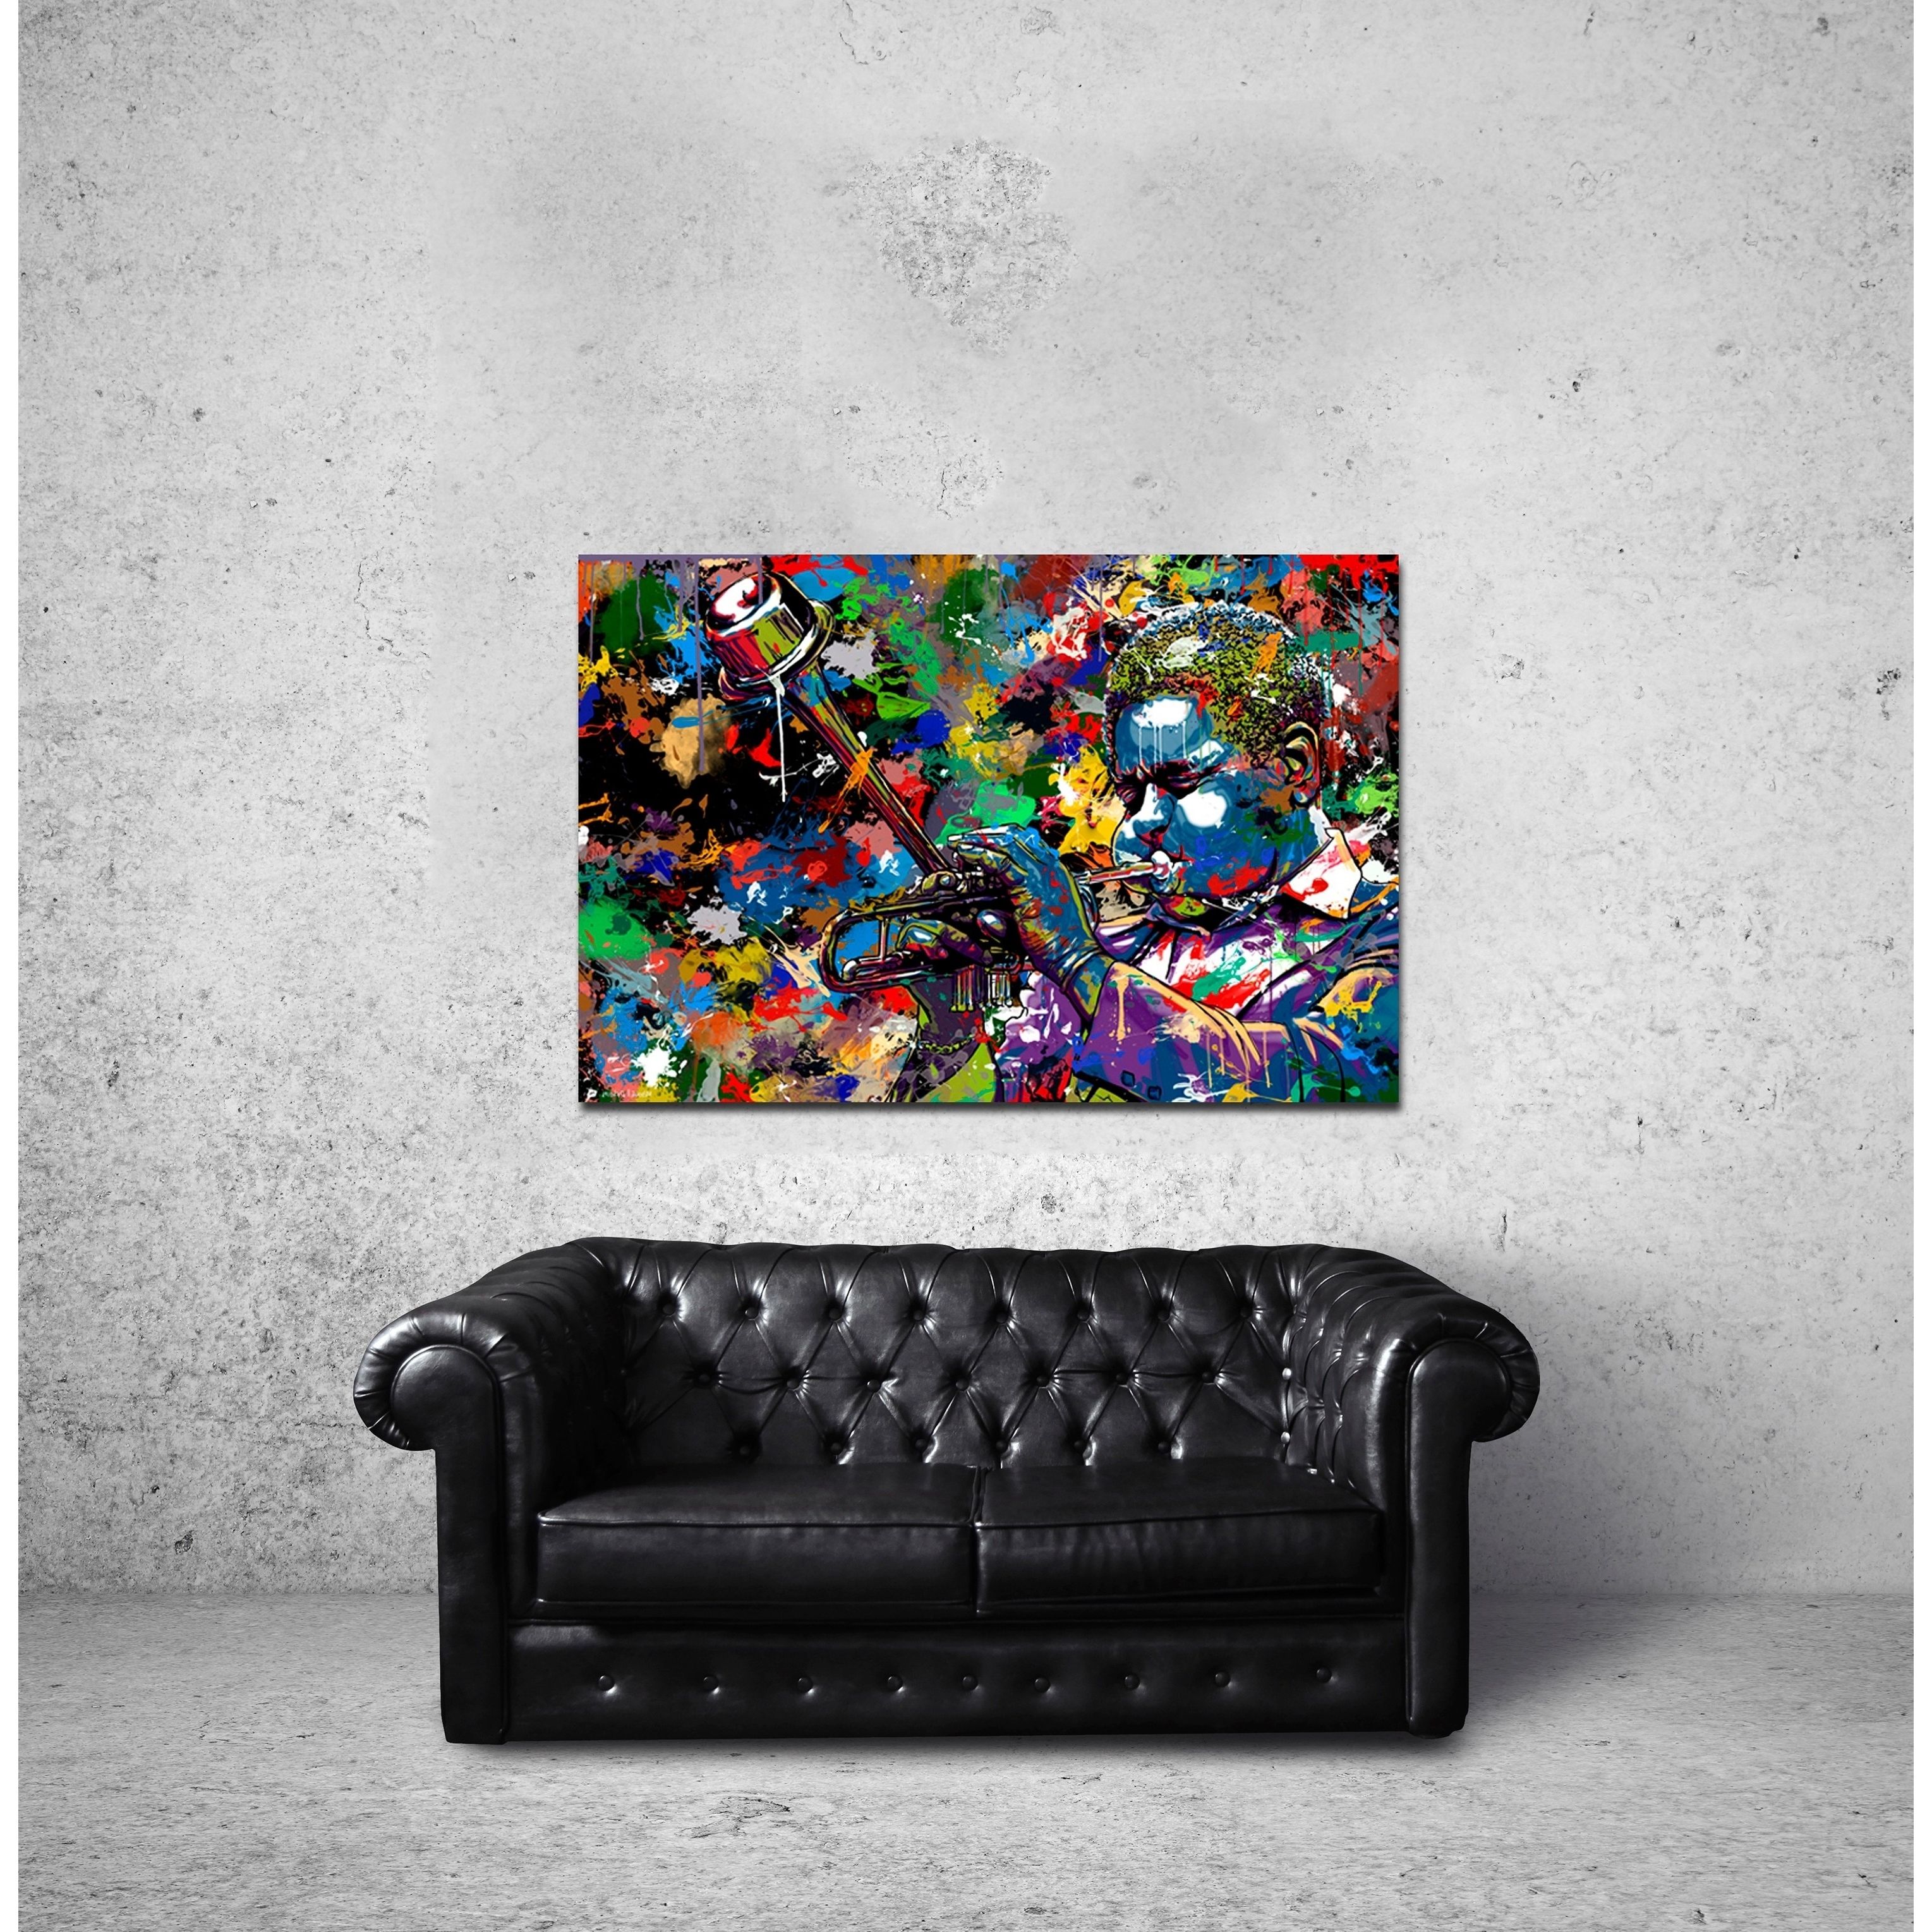 Limited Edition Canvas Wall Art Within Most Popular Maxwell Dickson 'jazz' Limited Edition Canvas Wall Art – Free (View 3 of 15)